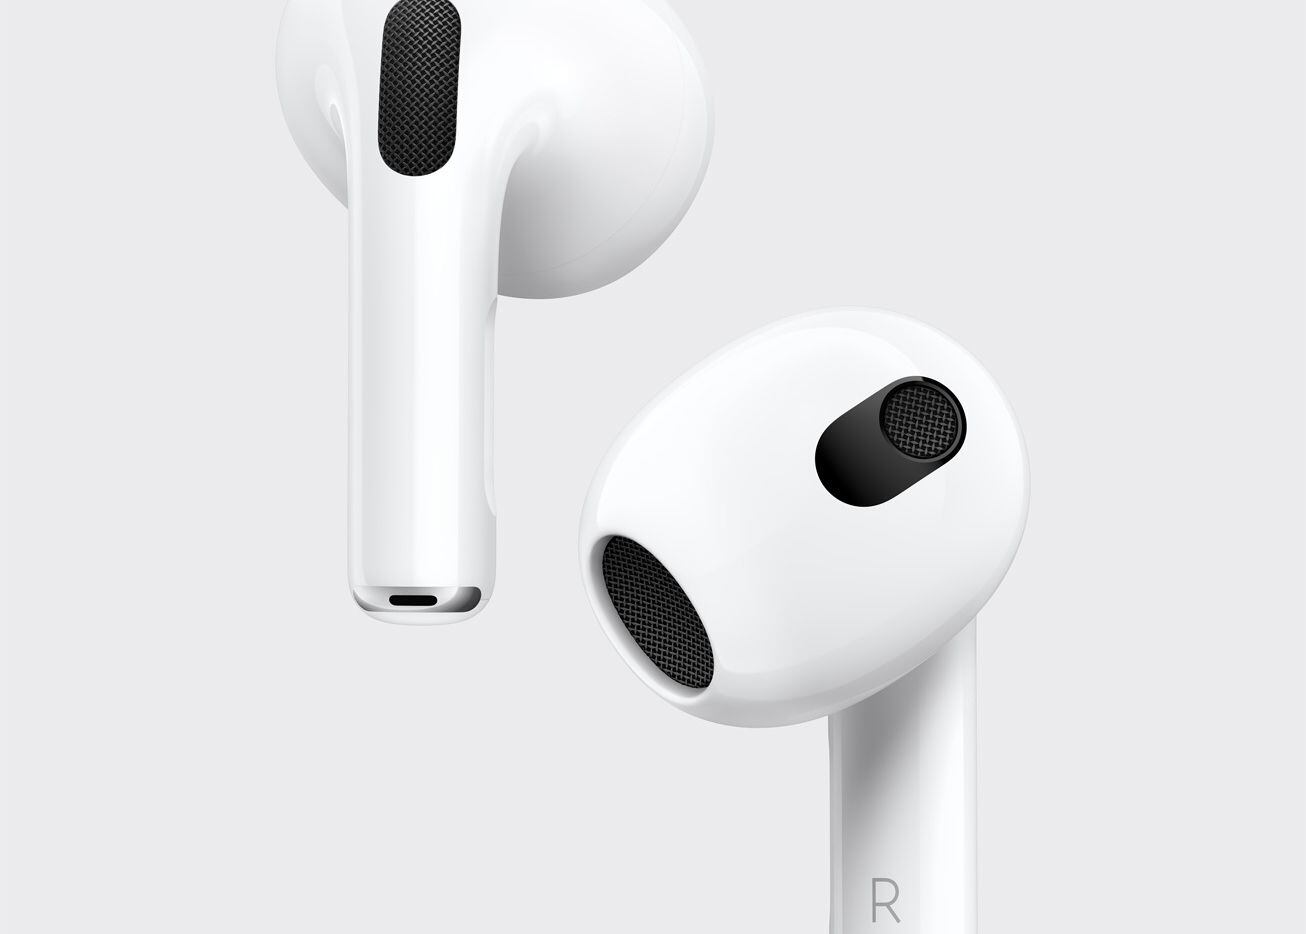 kronblad Spil Pigment How to choose between the new AirPods and the AirPods Pro